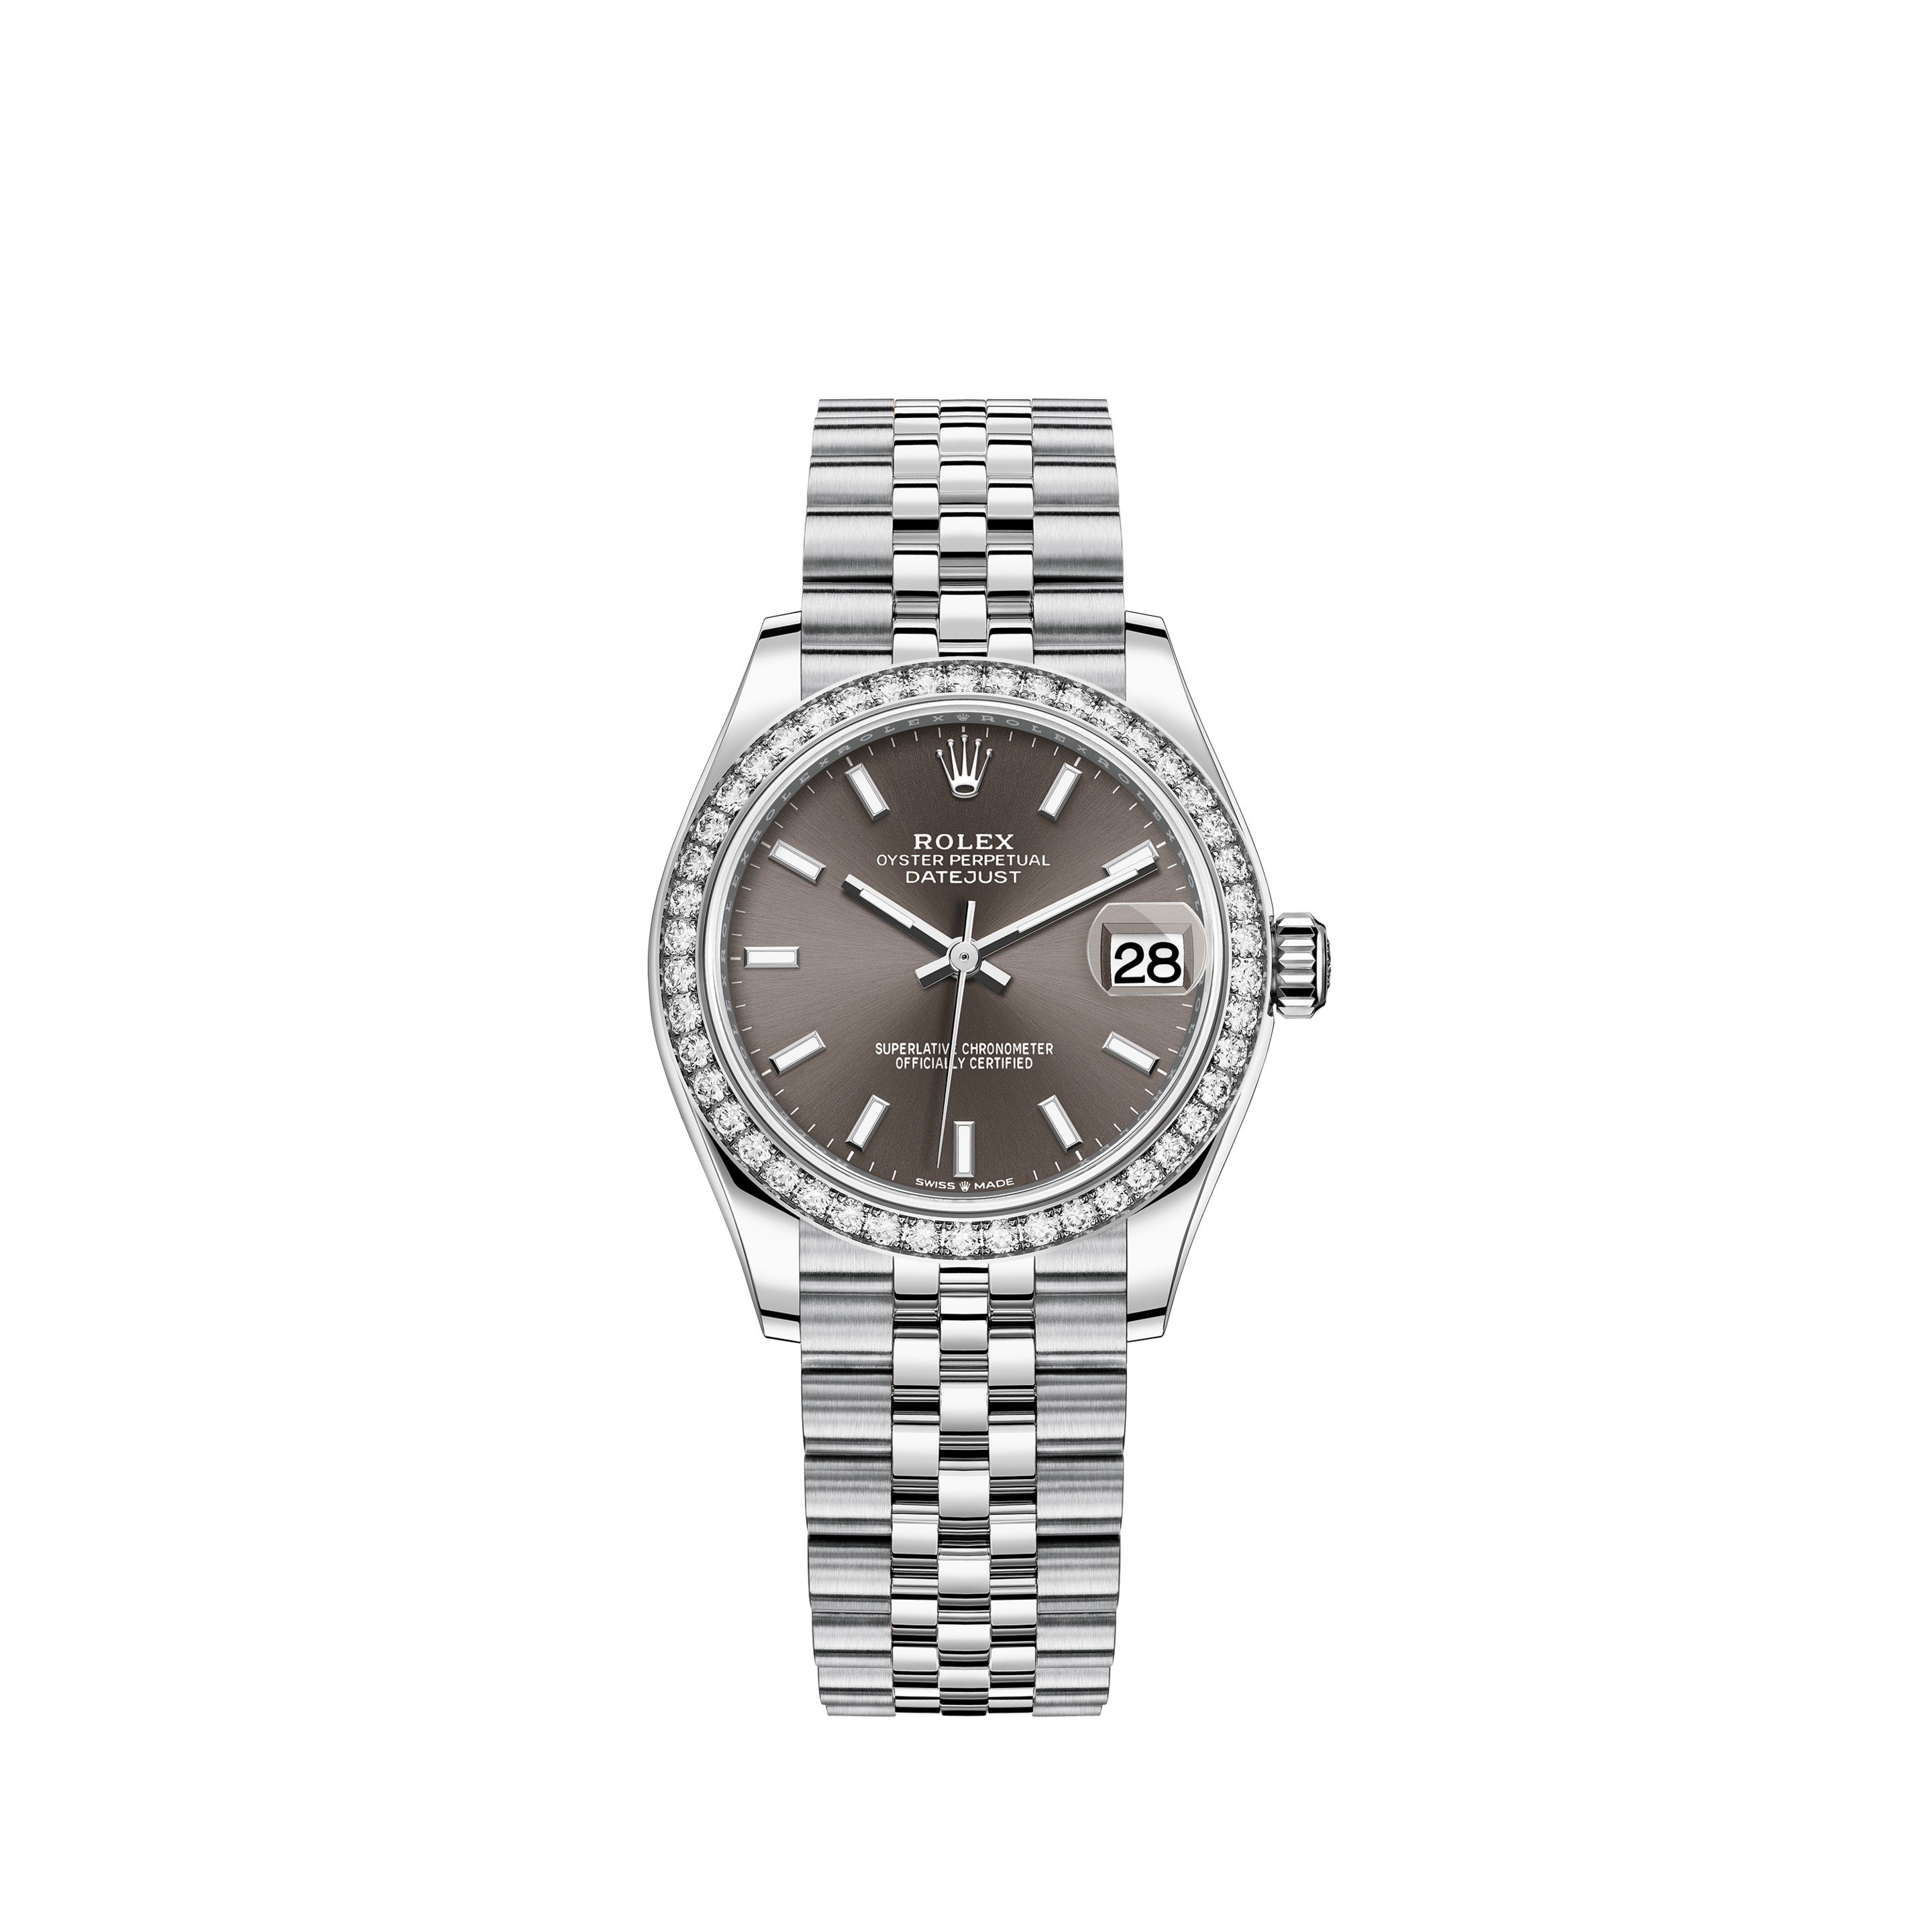 Datejust 31 278384RBR White Gold & Stainless Steel Watch (Dark Grey) - Click Image to Close